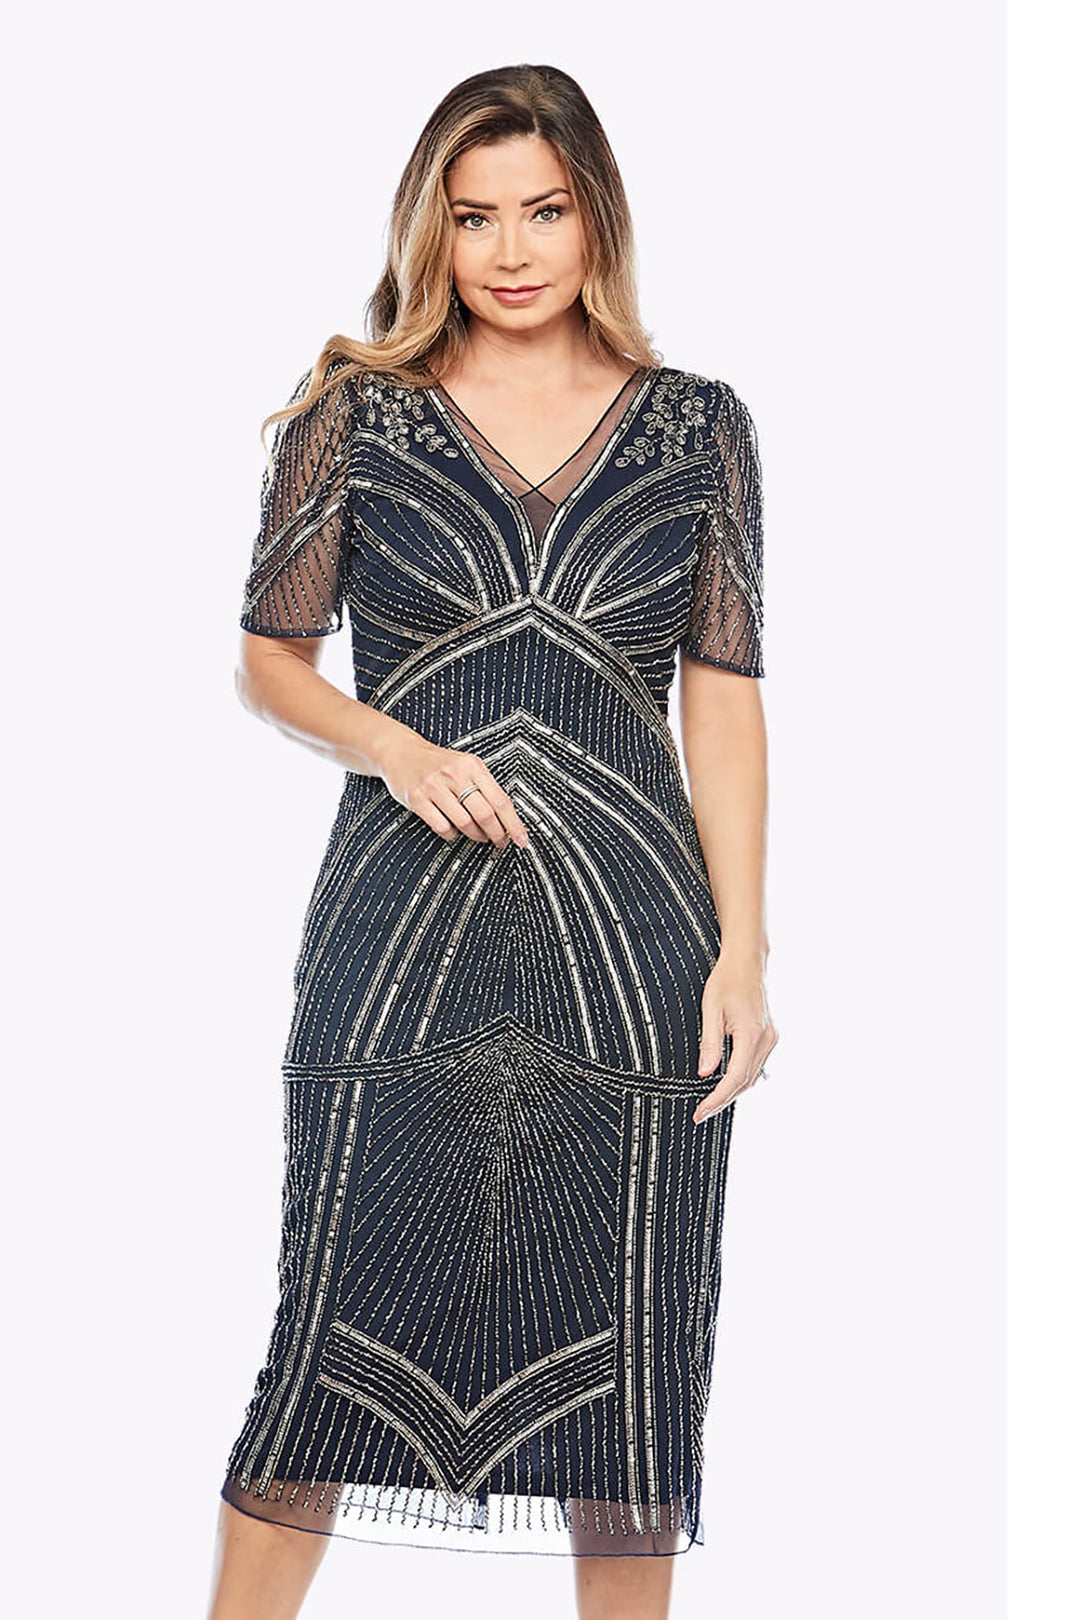 Beaded Queen Dress in midnight by Jess Harper, sold and shipped from Pizazz Boutique Nelson Bay women's dresses online Australia